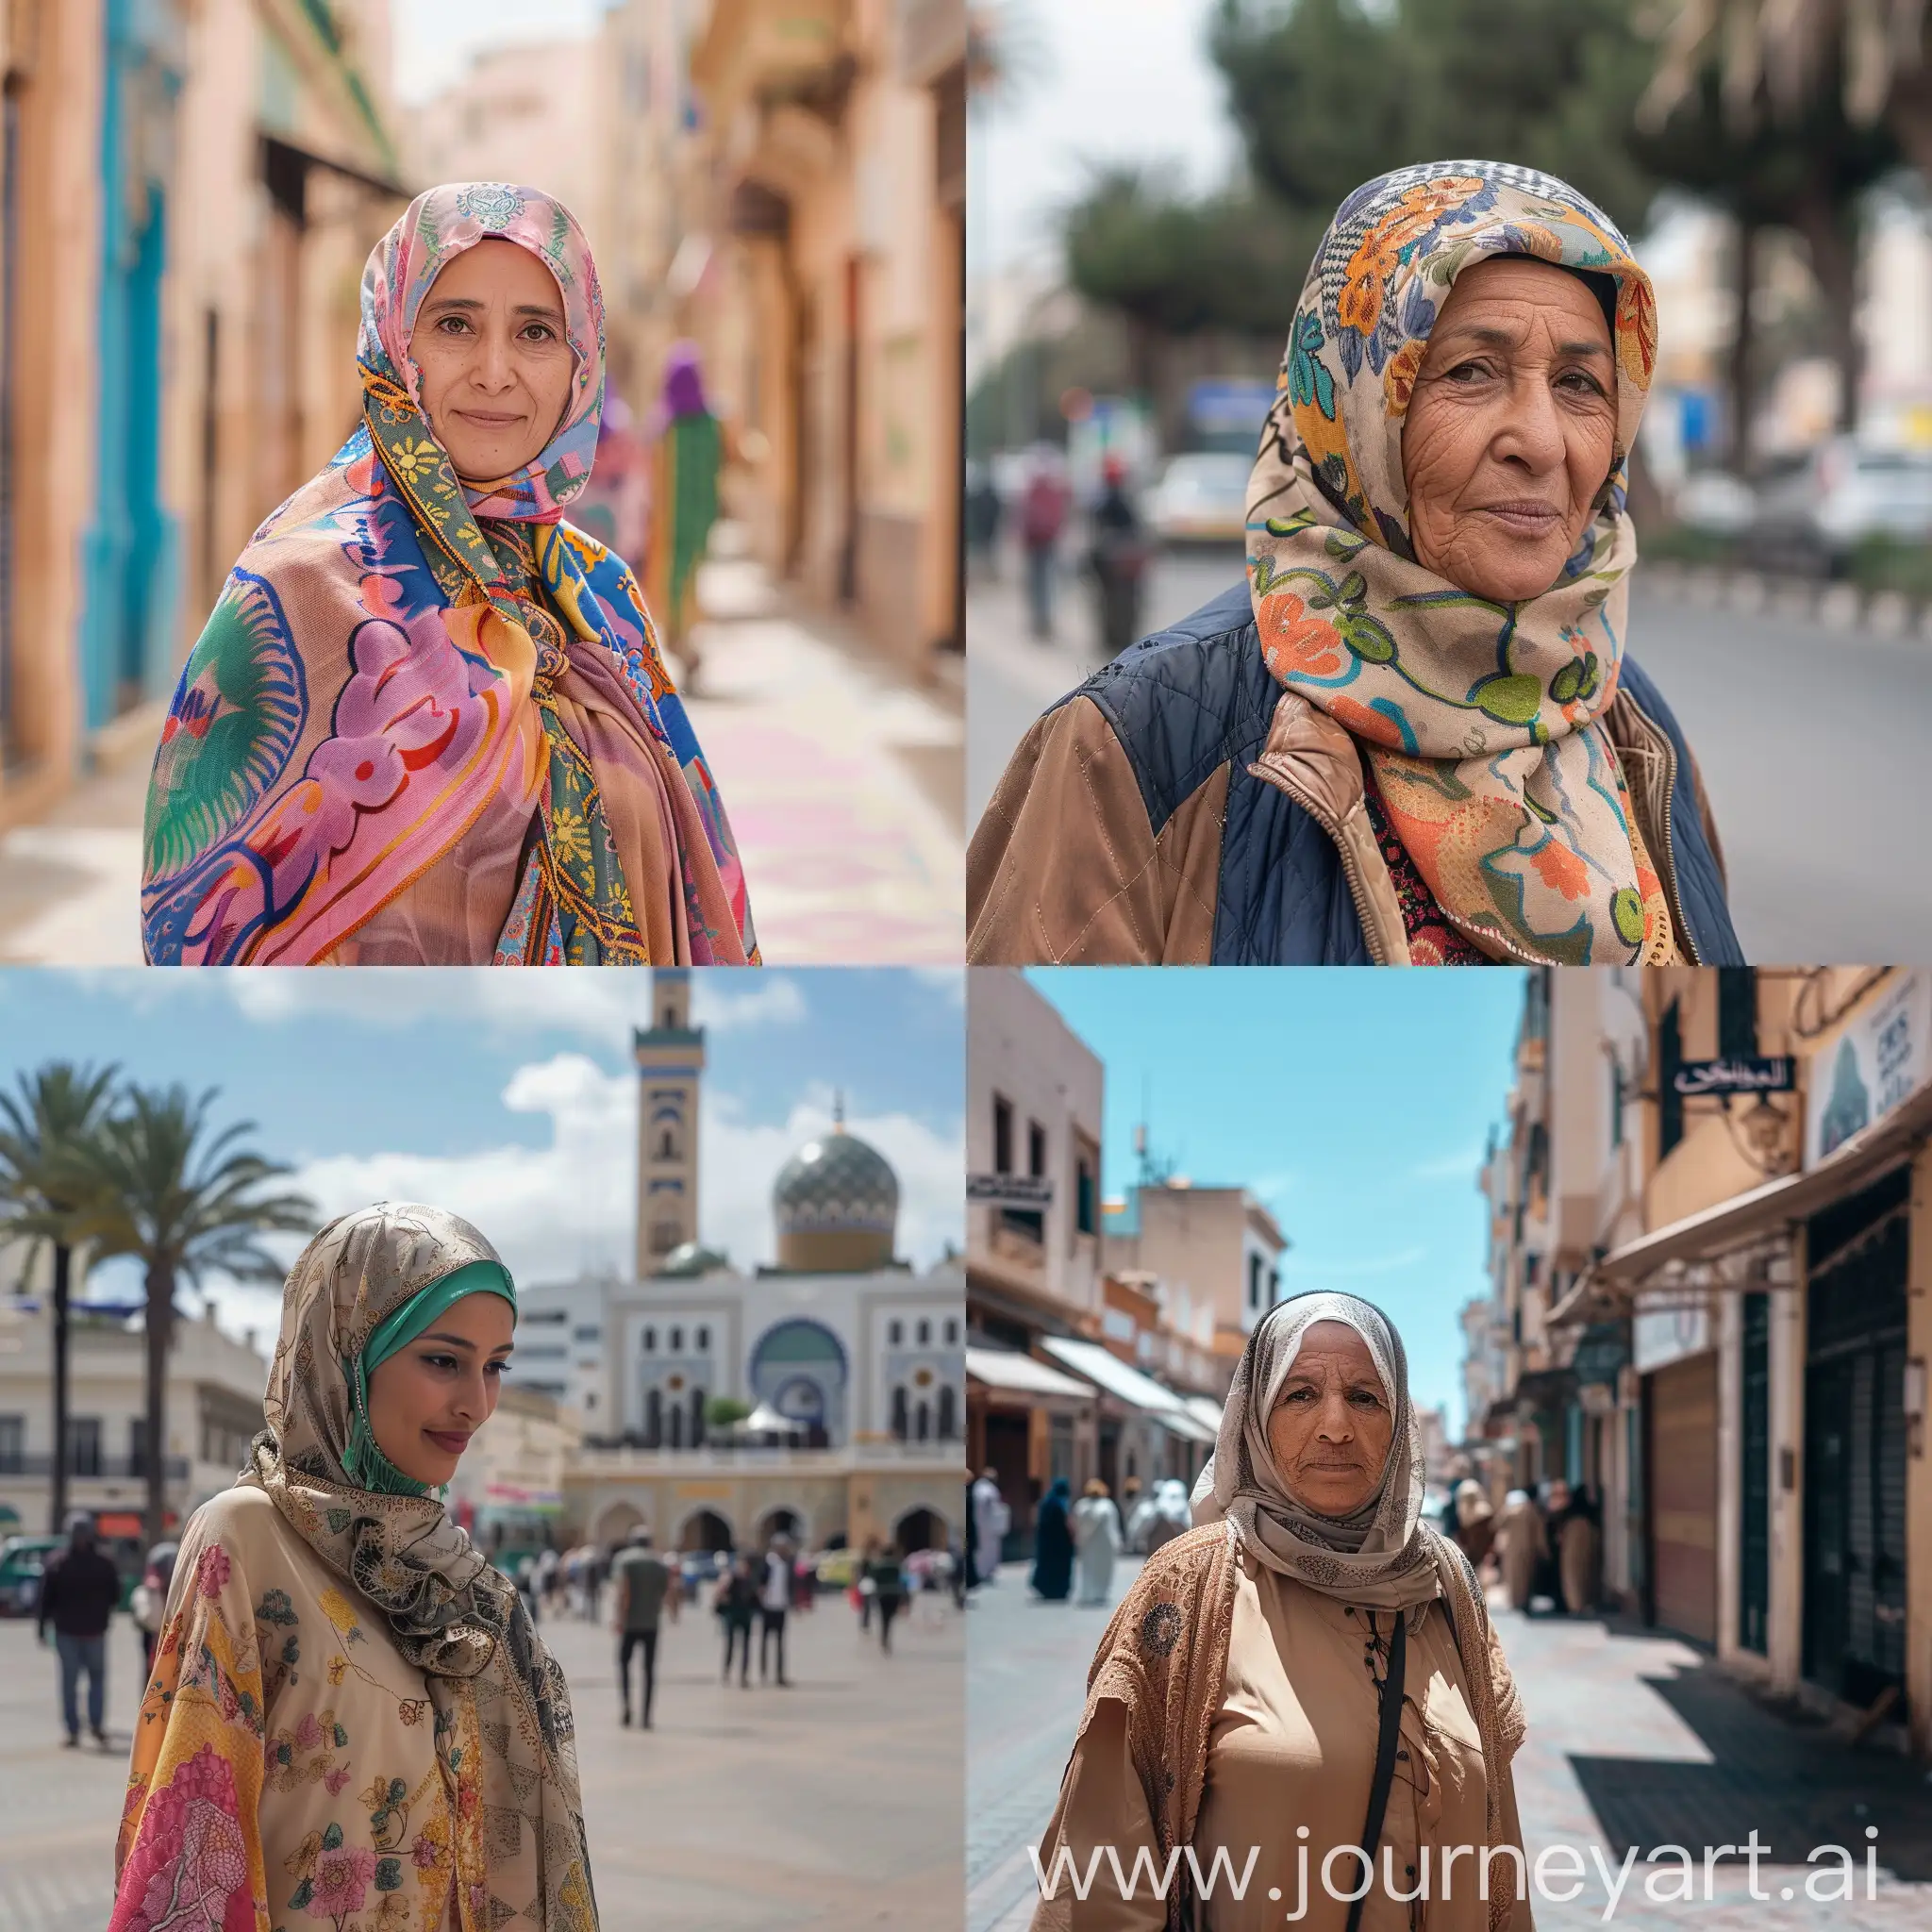 Moroccan lady in Rabat in the middle of the city center